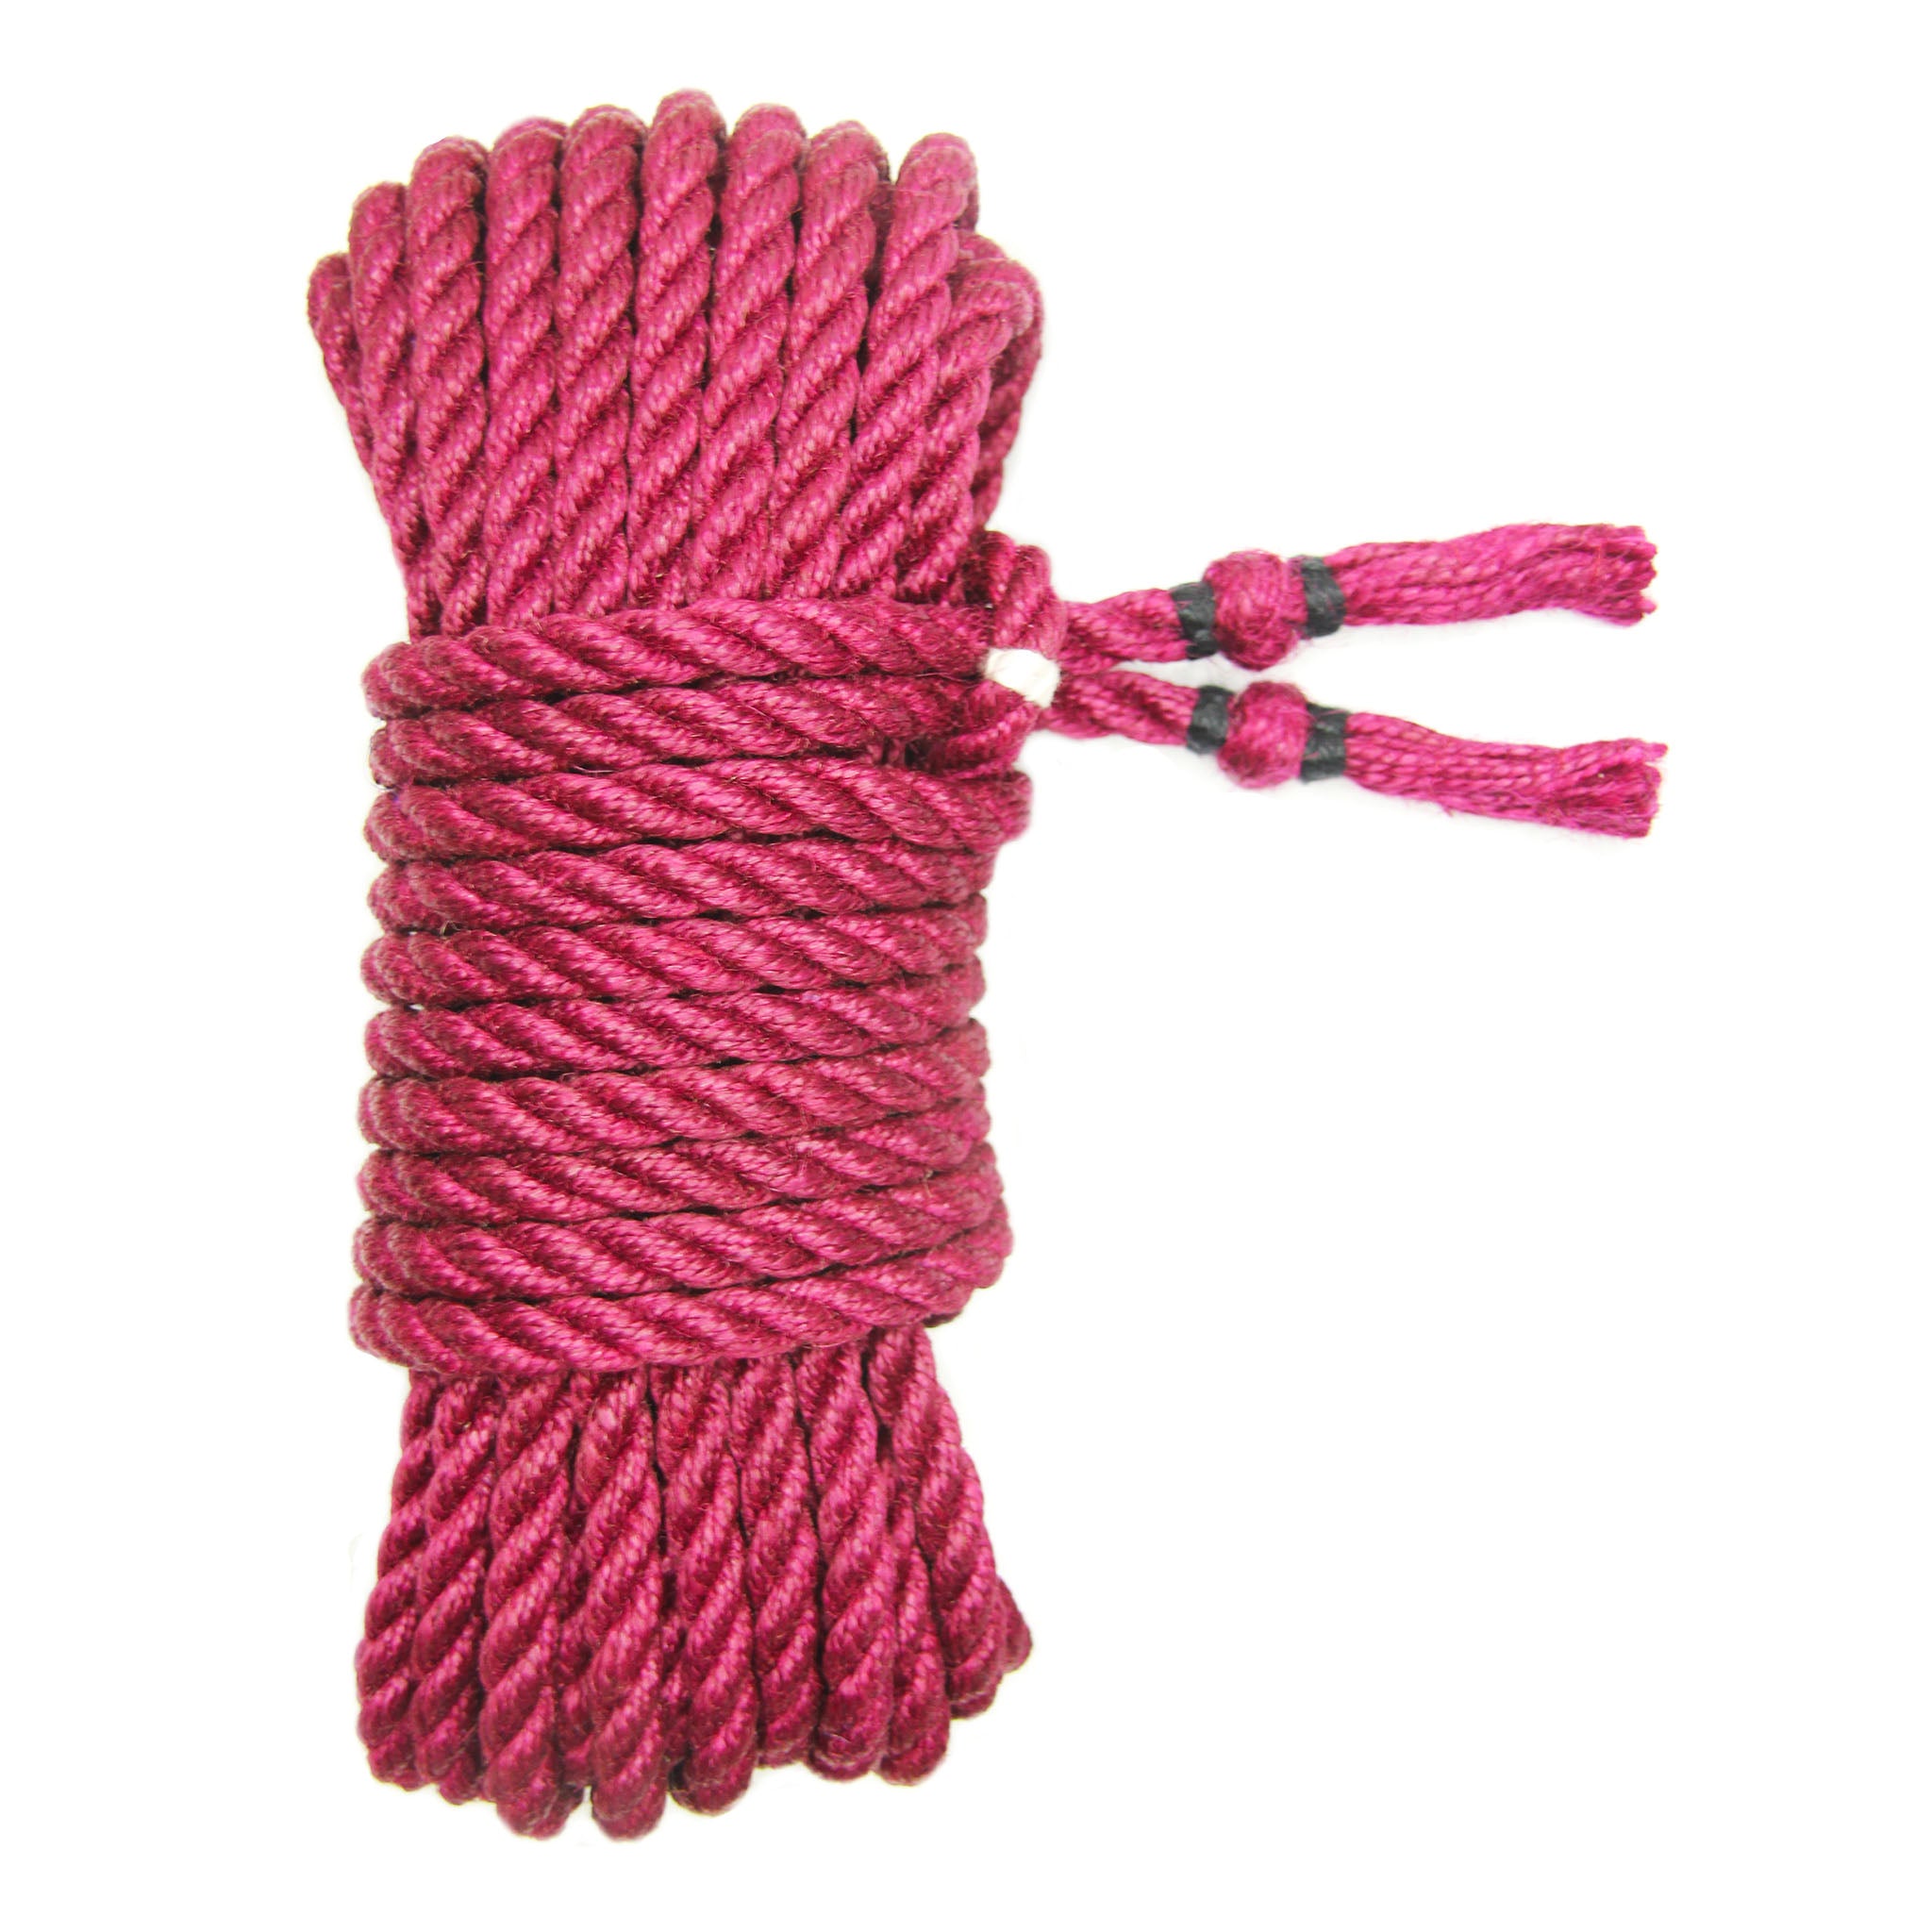 Red jute rope (treated, 6mm), Anatomie Rope Shop